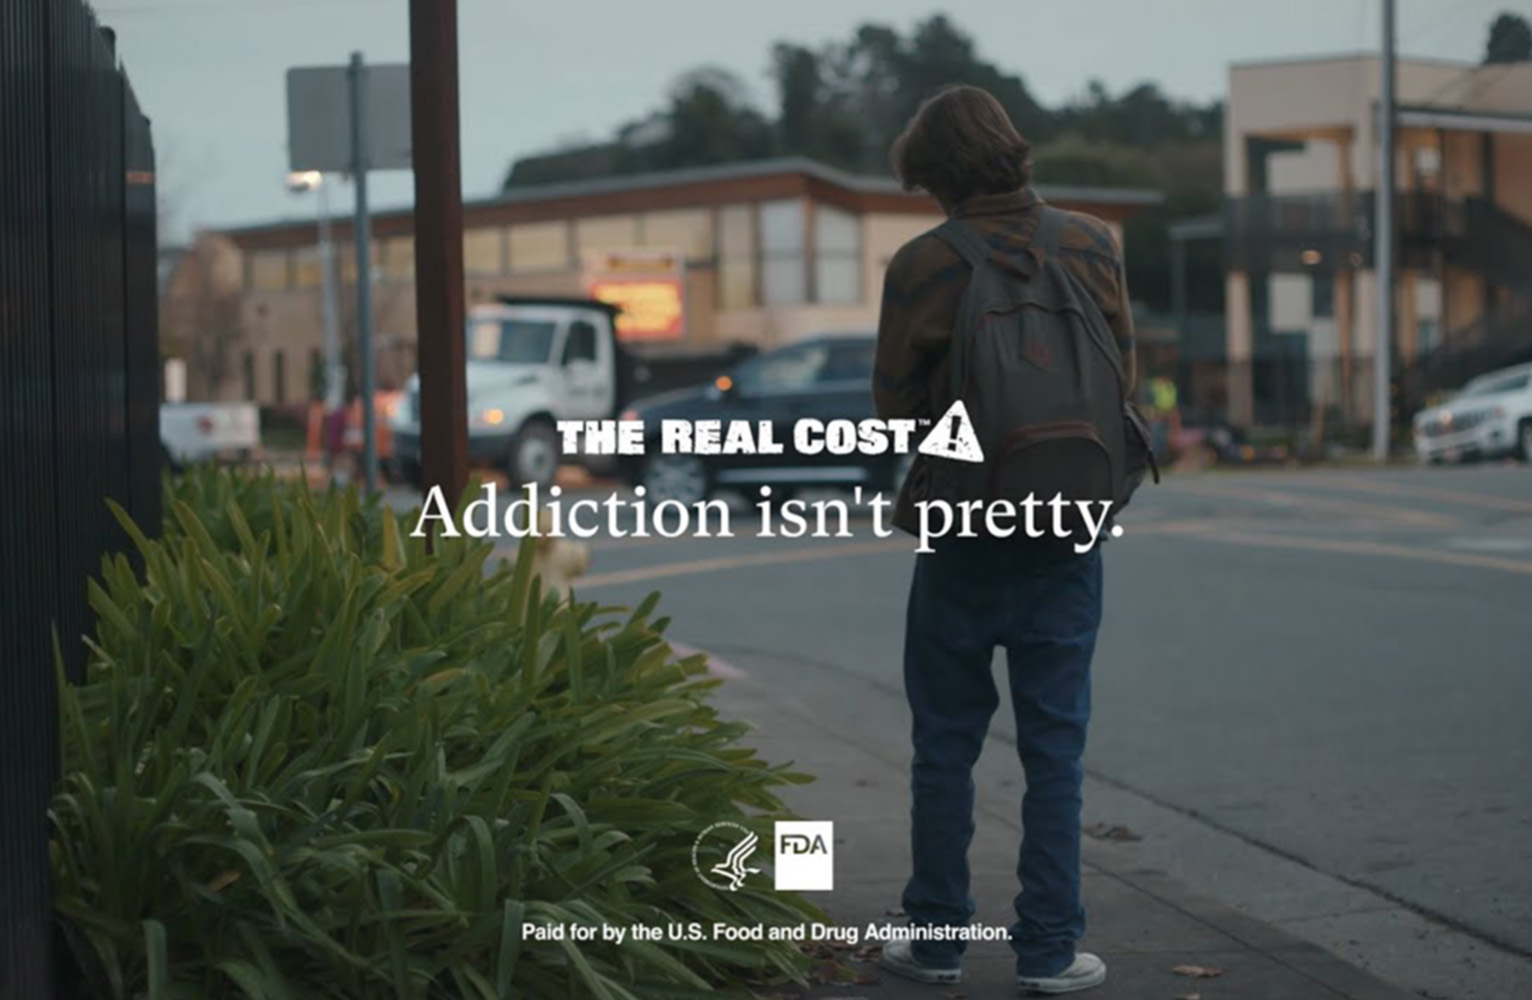 Screencap from a The Real Cost ad, showing a teenager smoking